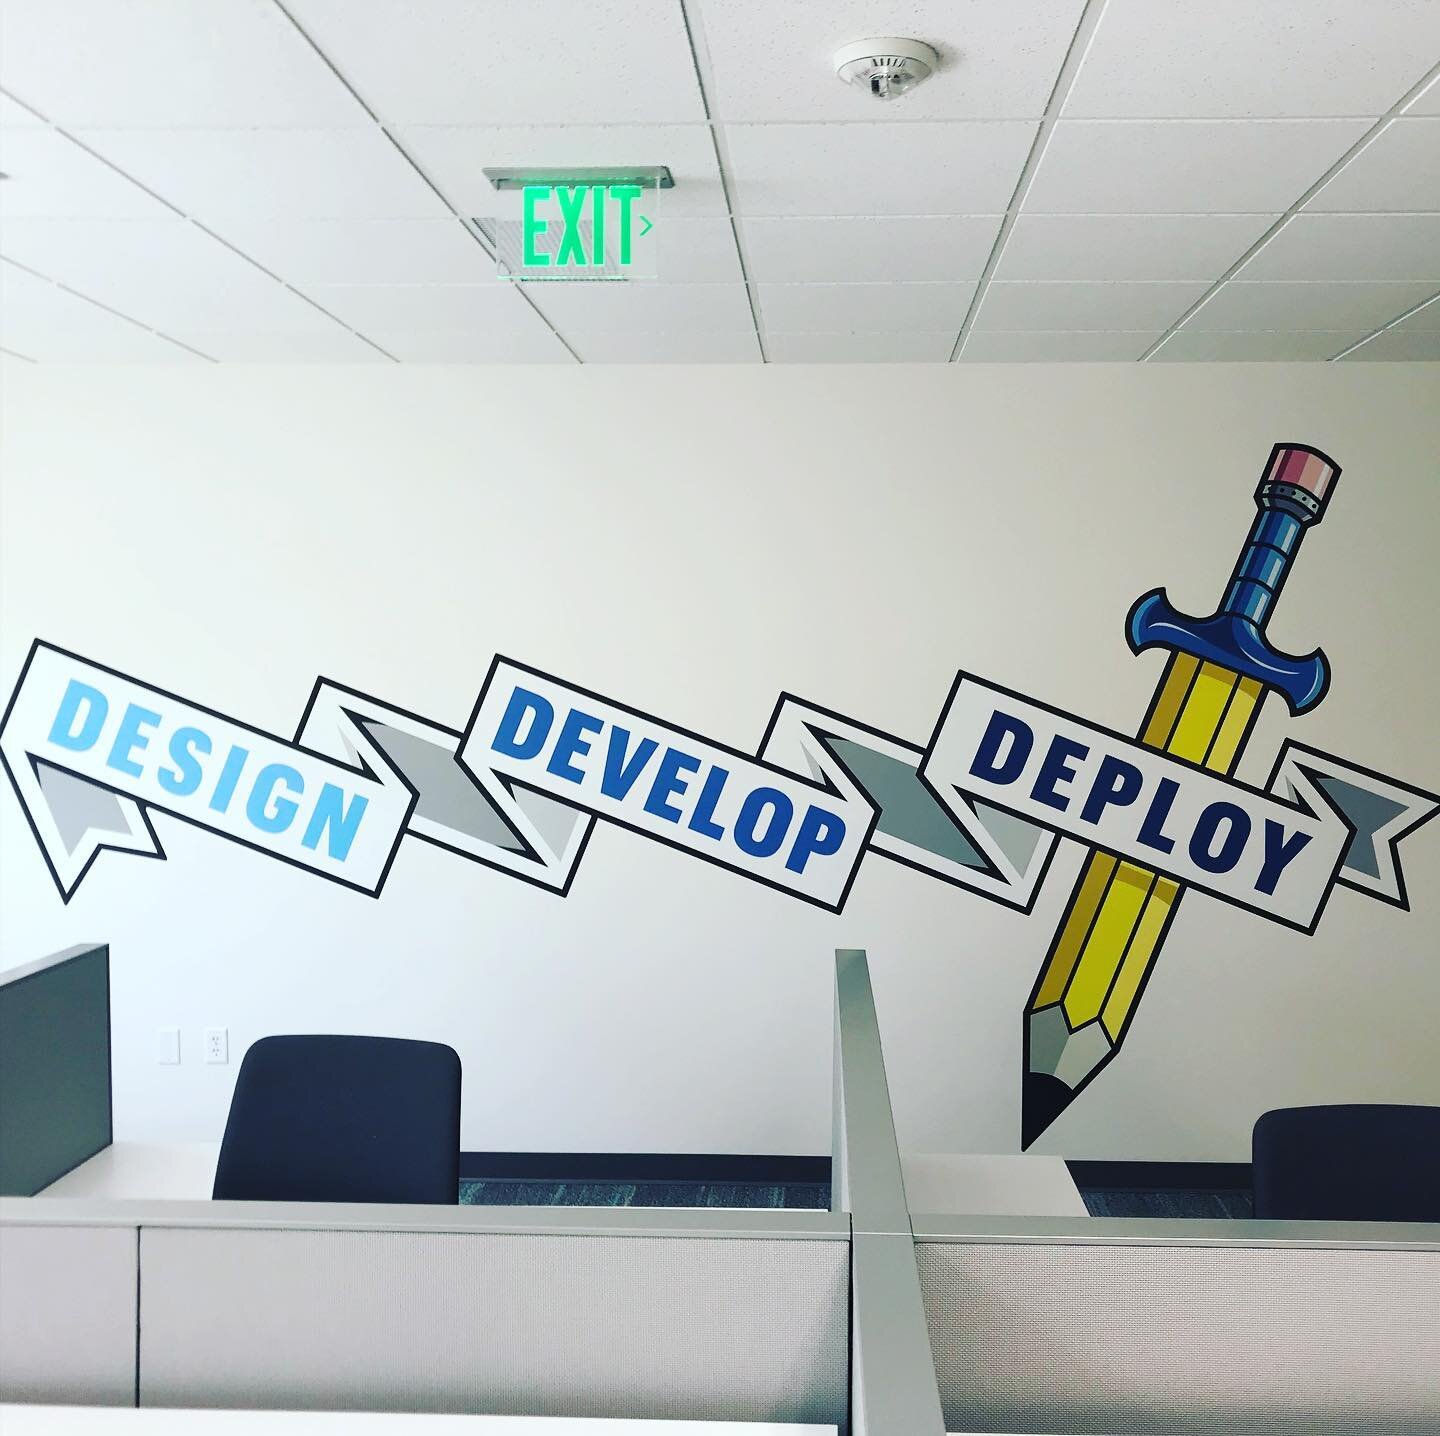 No one is in the office to appreciate it....but the new wall graphics I designed for @accentureinteractive in Boise are up. Looking sharp! Thanks @coxtim73 for the great project.

#boise #idaho #halfbasquejob #accenture #accentureinteractive #graphic